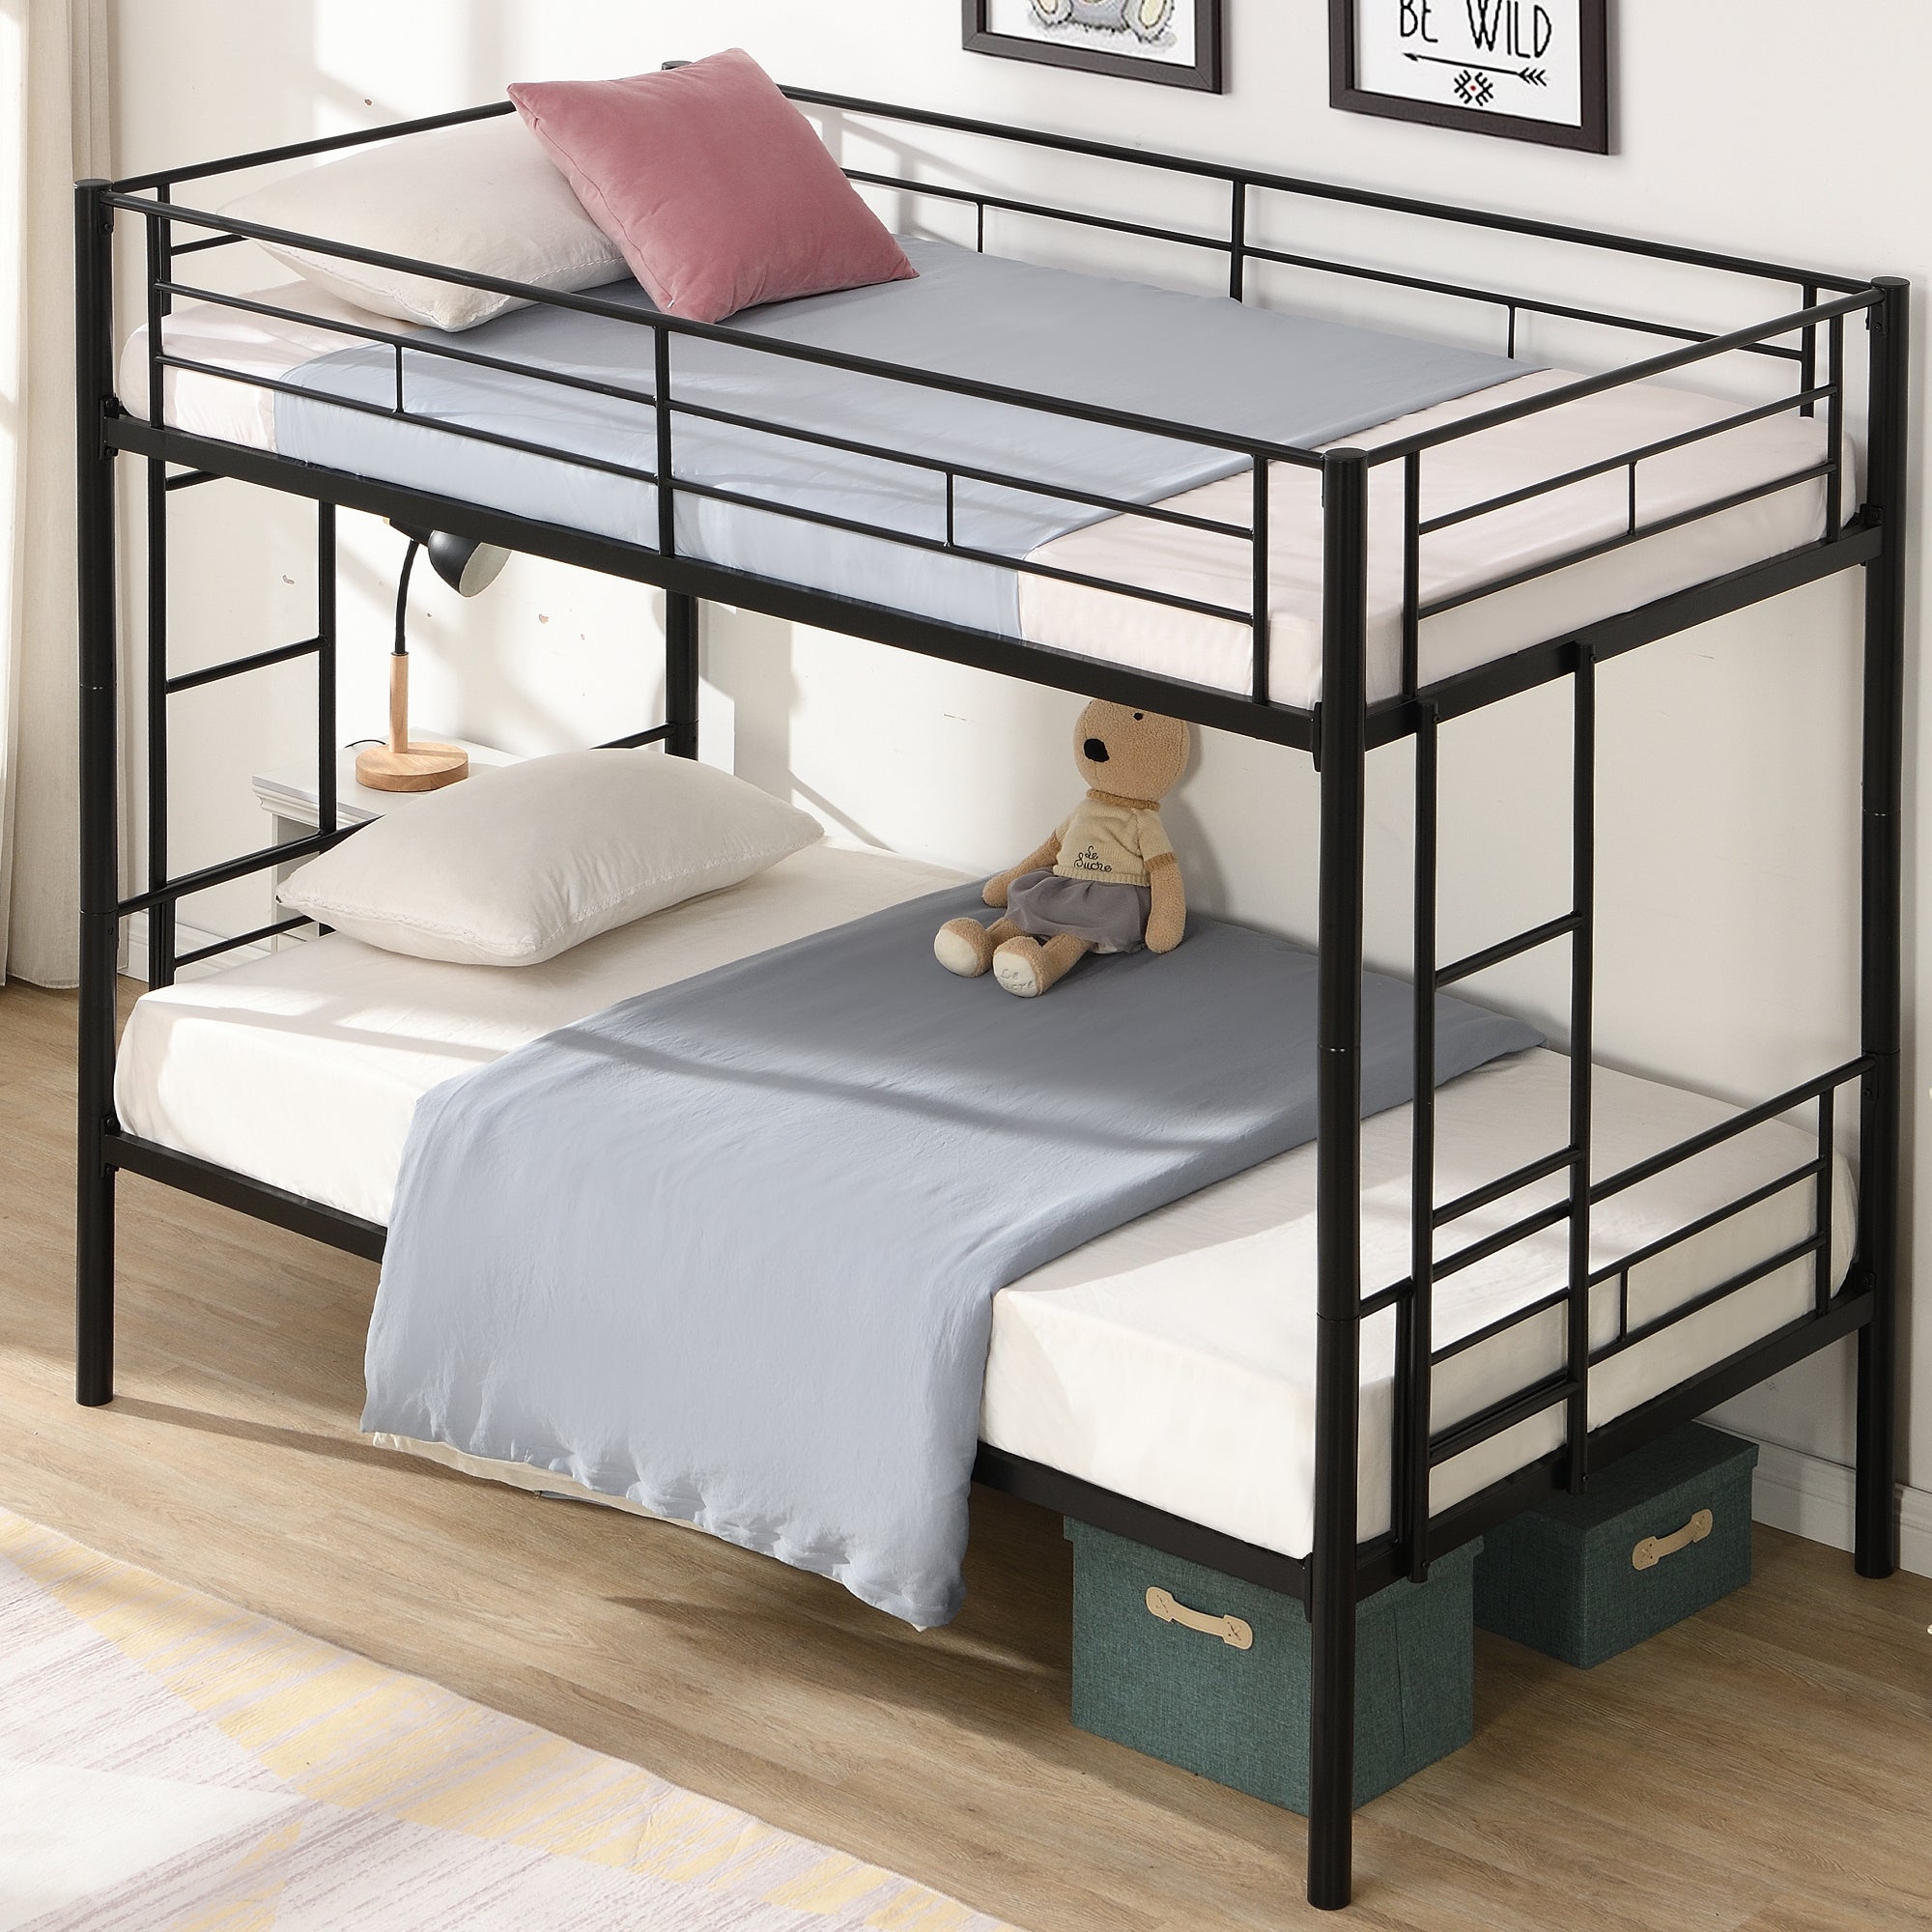 🆓🚛 Bunk Bed Twin Over Twin Size, 2 Ladders and Full-Length Guardrail, Metal, Storage Space, No Box Spring Needed, Noise Free, Black